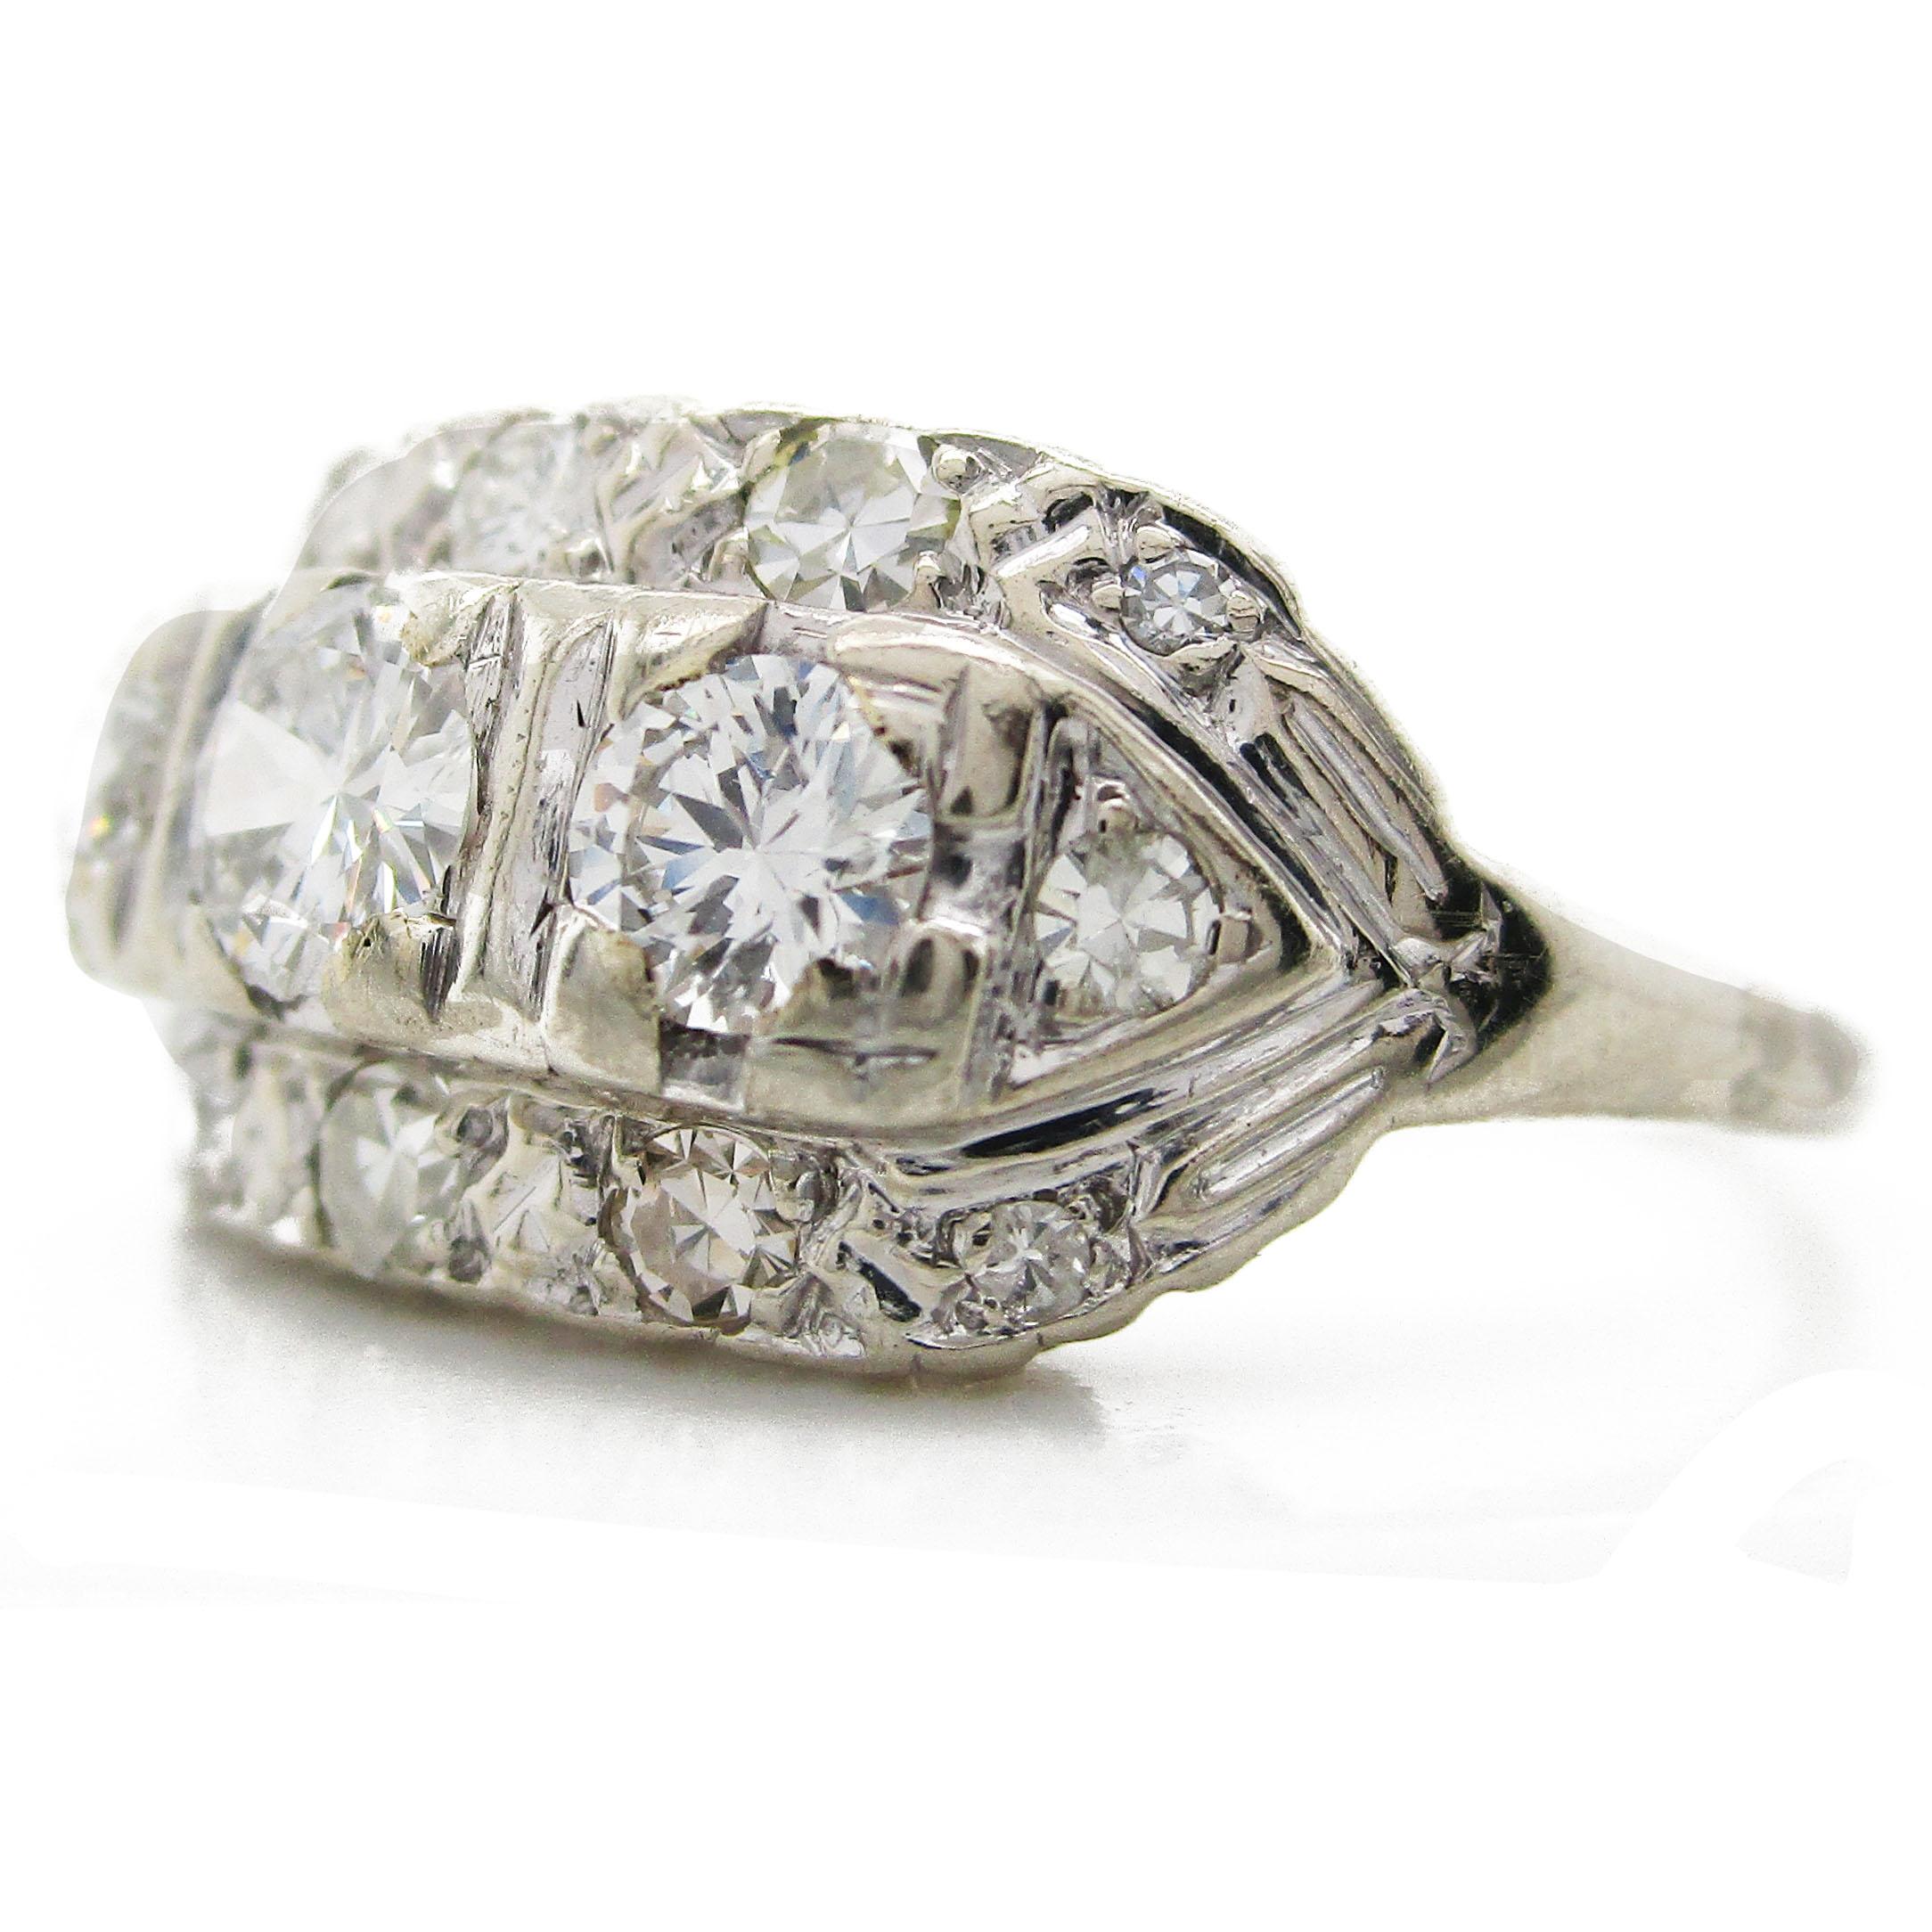 This absolutely gorgeous 1940's ring is in classic Deco , with three center stones surrounded by a diamond gallery! The three stone center is enhanced by the twelve diamonds surrounding it. The top and bottom are framed by four diamonds each, and